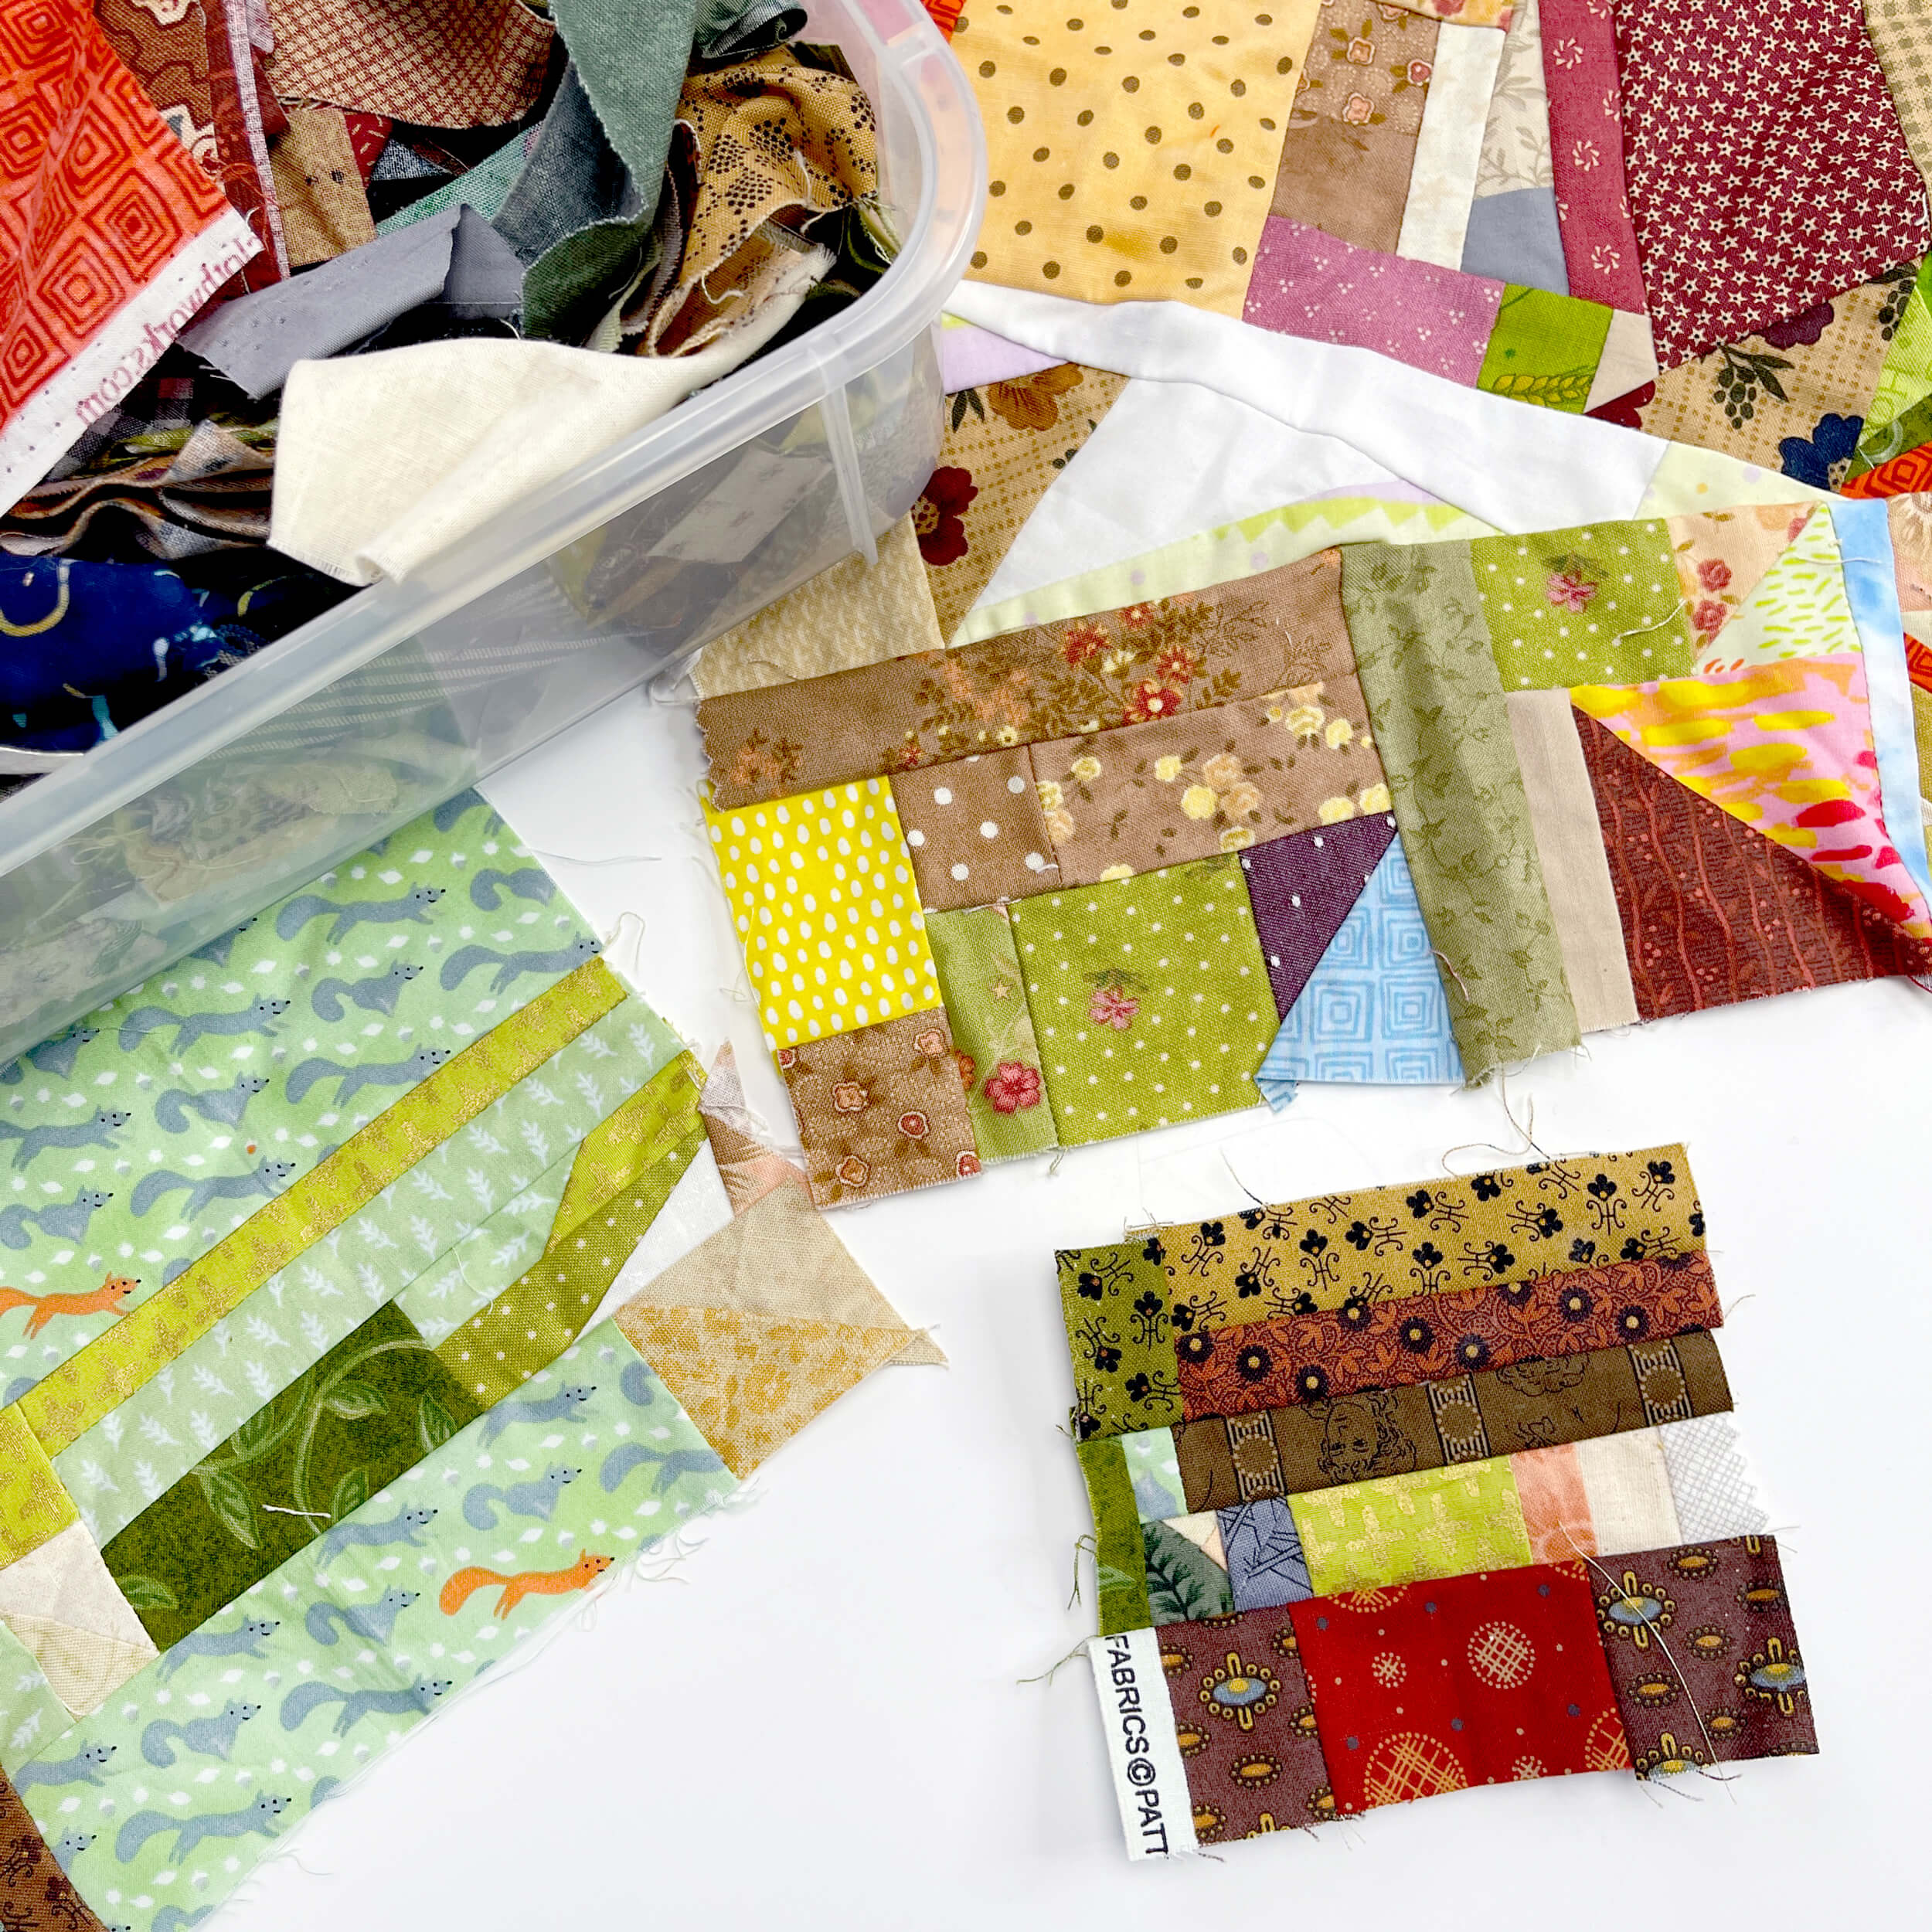 a pile of scrap fabric with several pieces that have been improve pieced together.